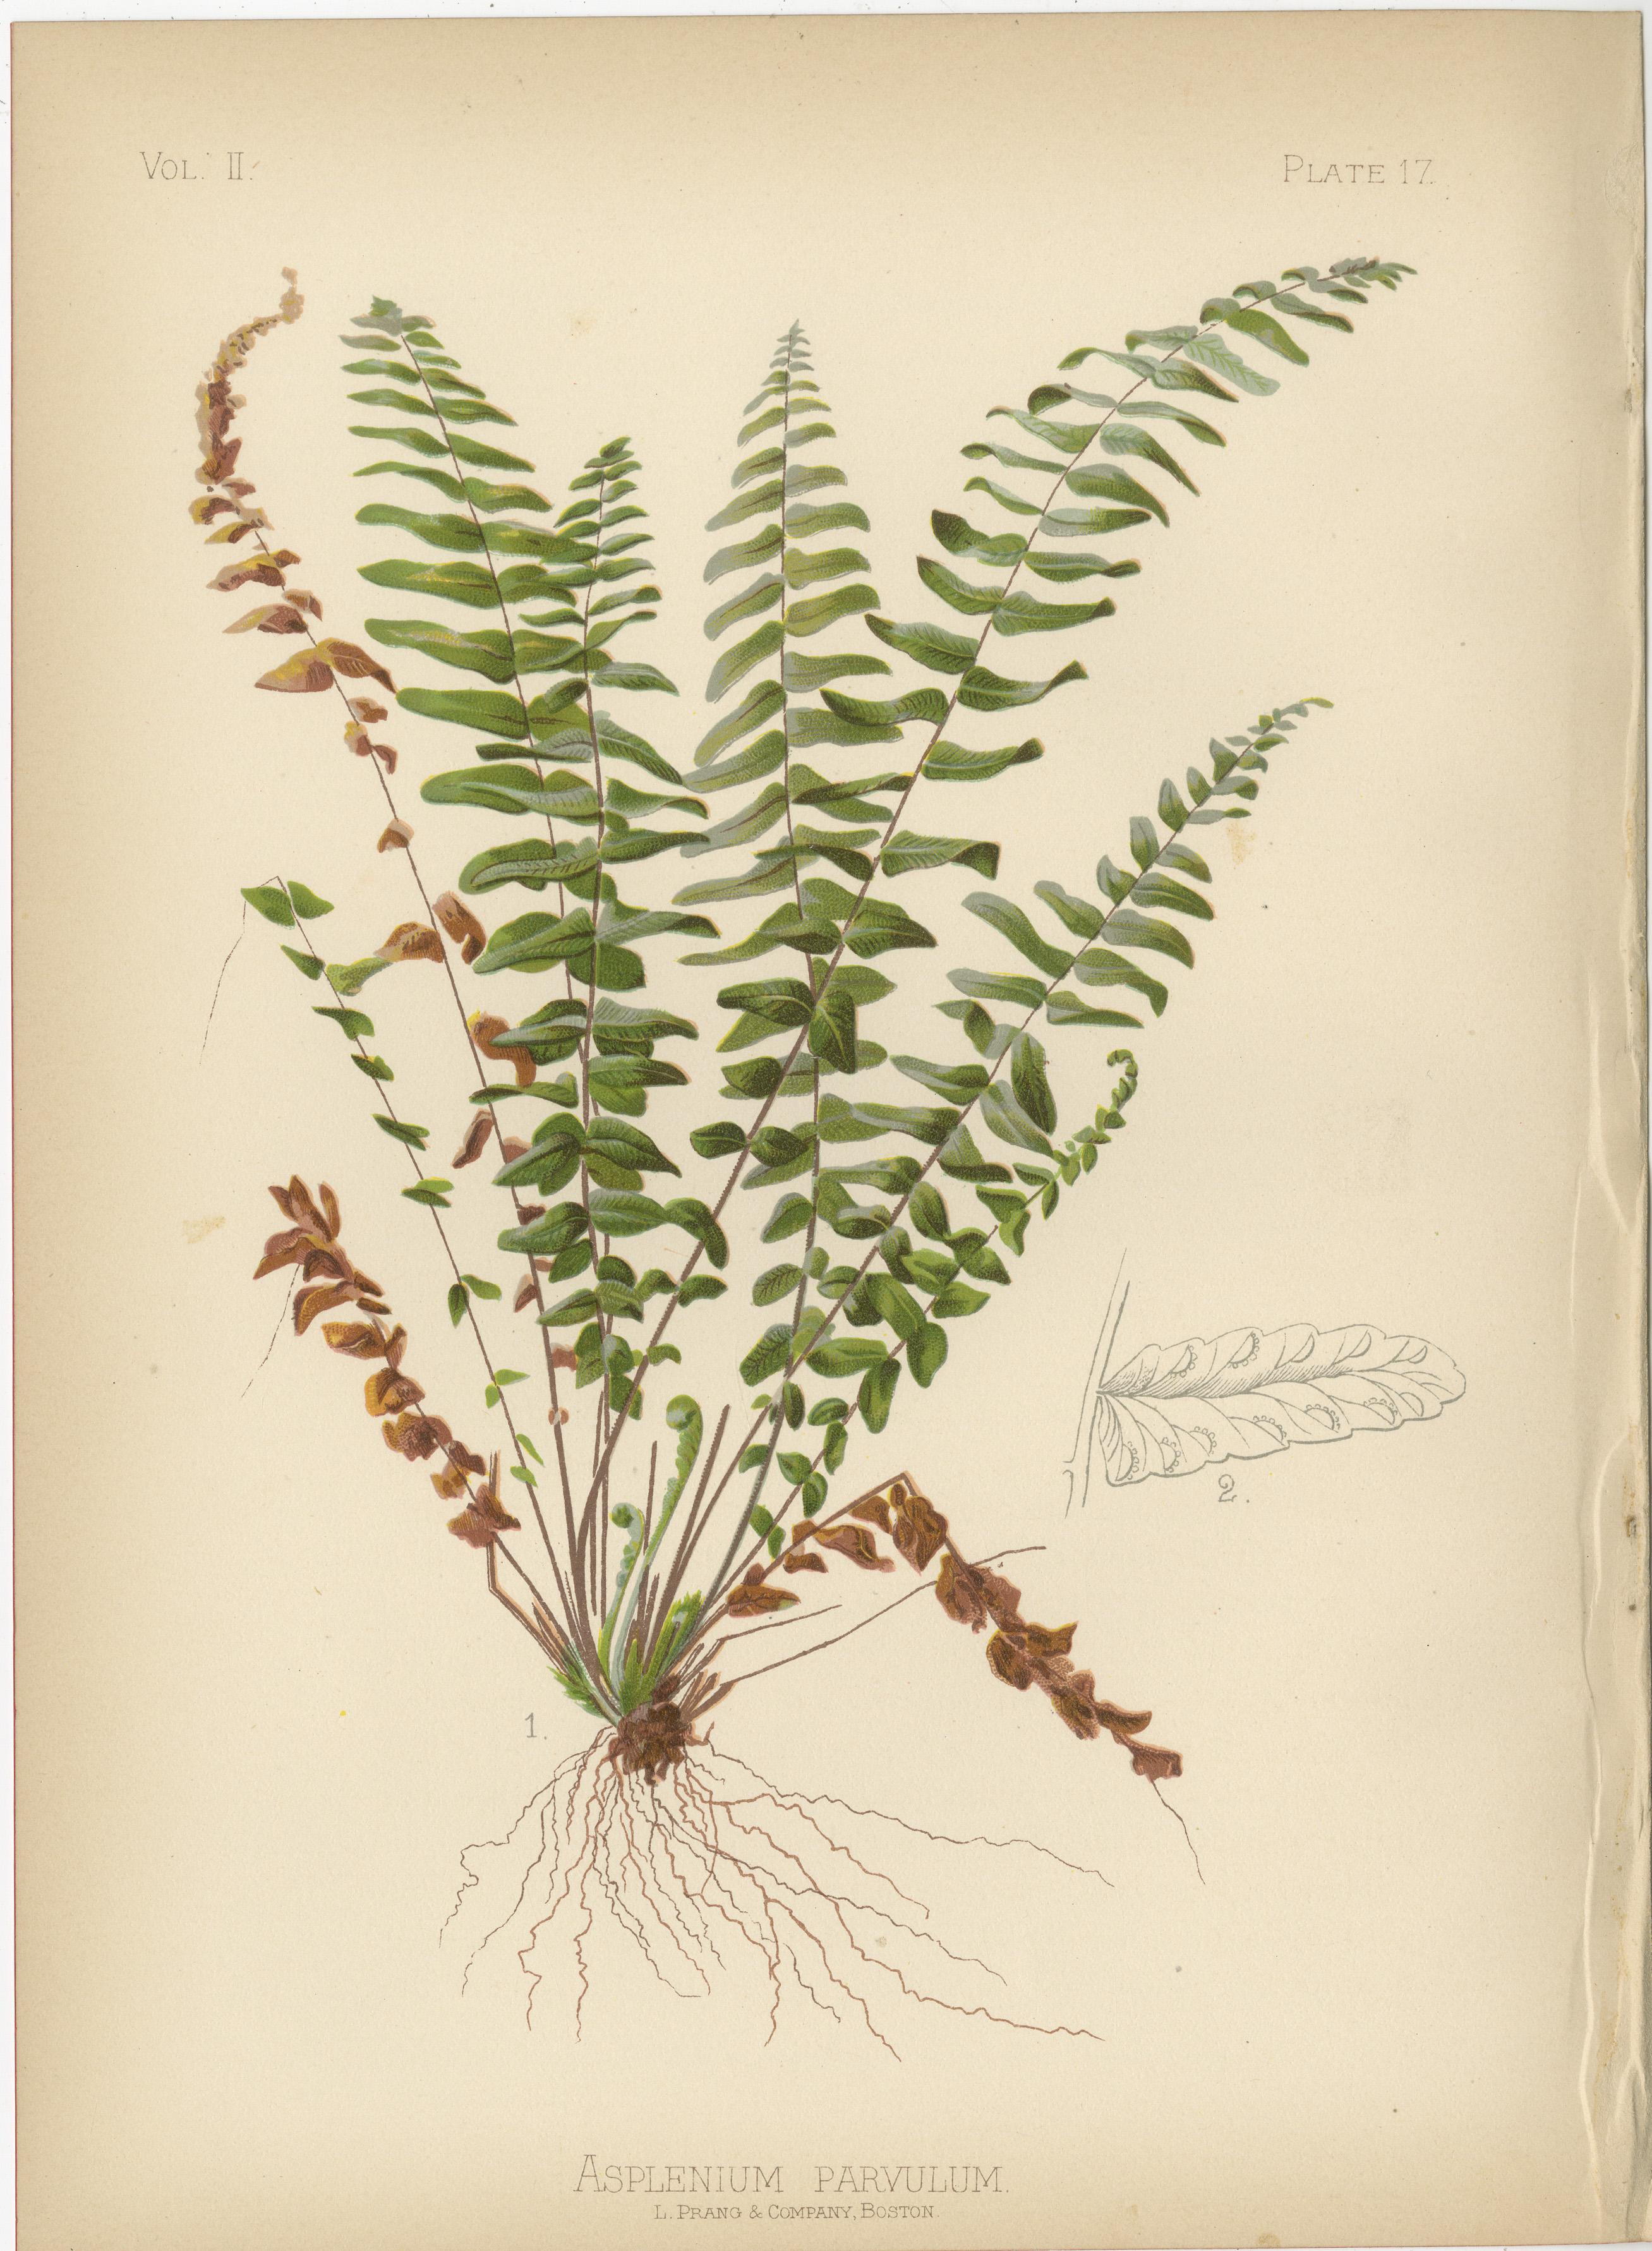 Beautiful chromolithographs of various plant species from Thomas Meehan's 'The Native Flowers and Ferns of the United States', published in 1879. Here's a description of each plant depicted:

1. **Asplenium Parvulum** (Plate 17): This illustration